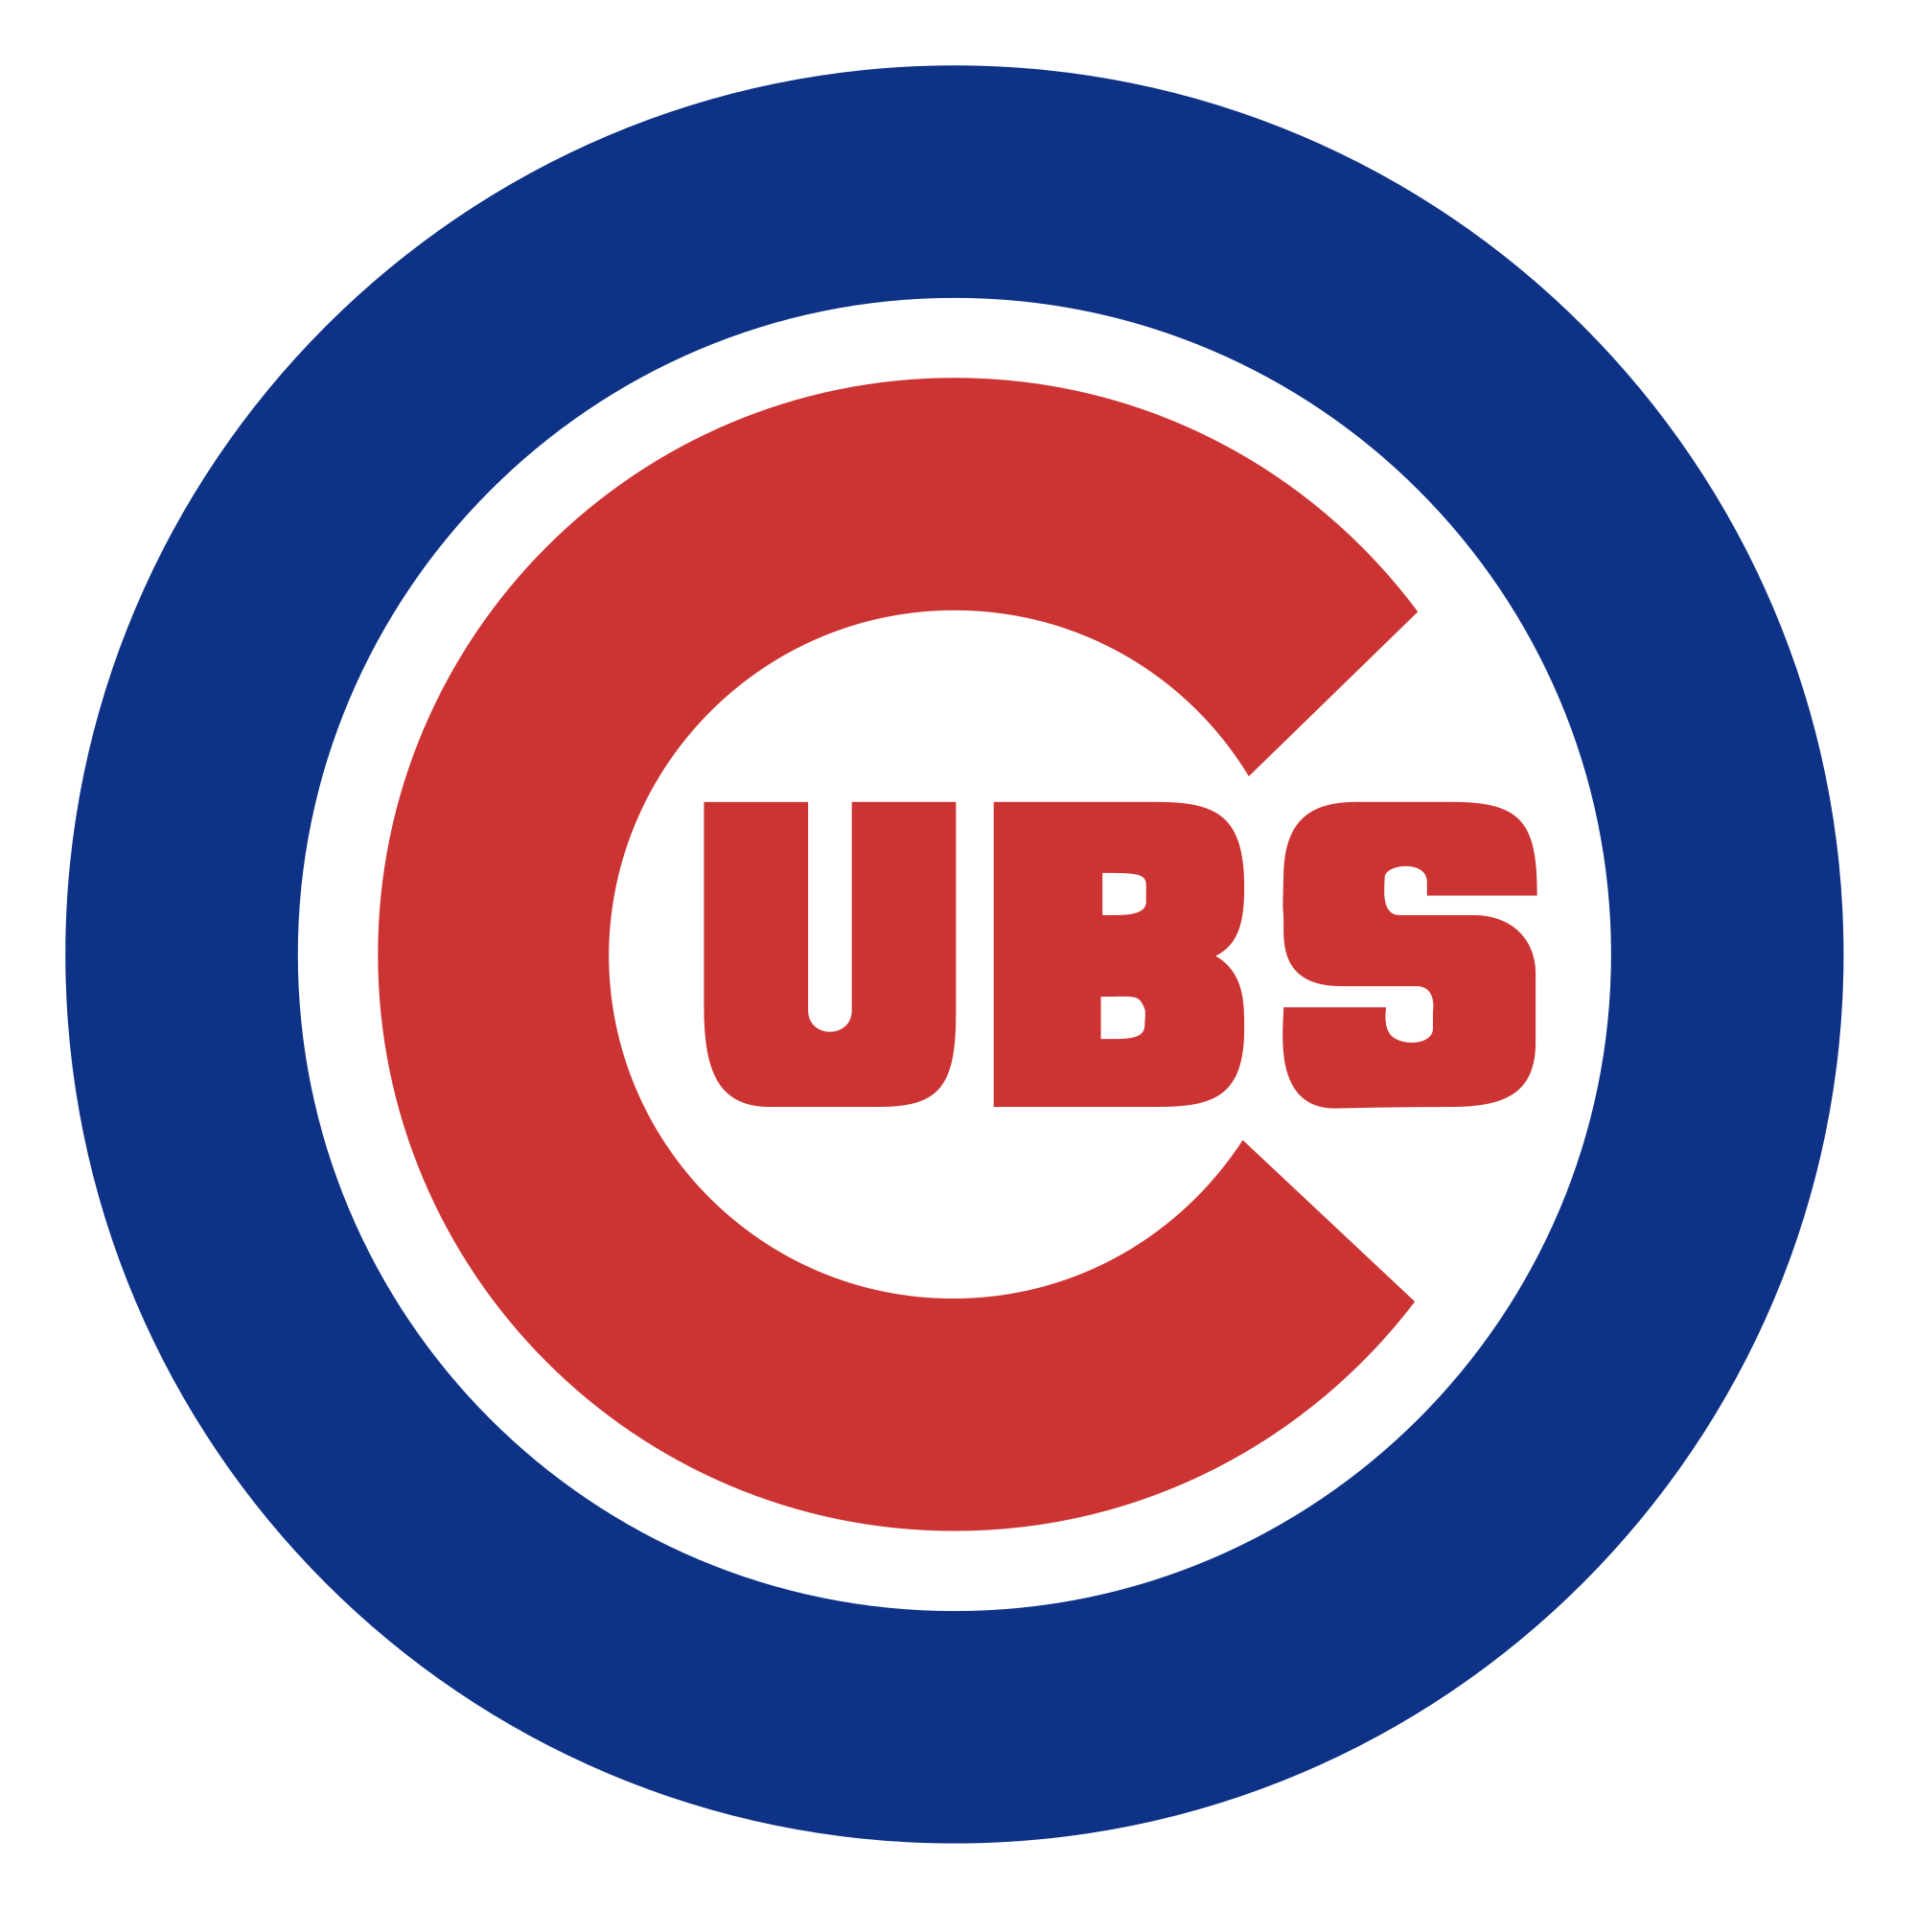 Chicago Cubs Logo - File:Chicago Cubs logo.svg - Wikimedia Commons